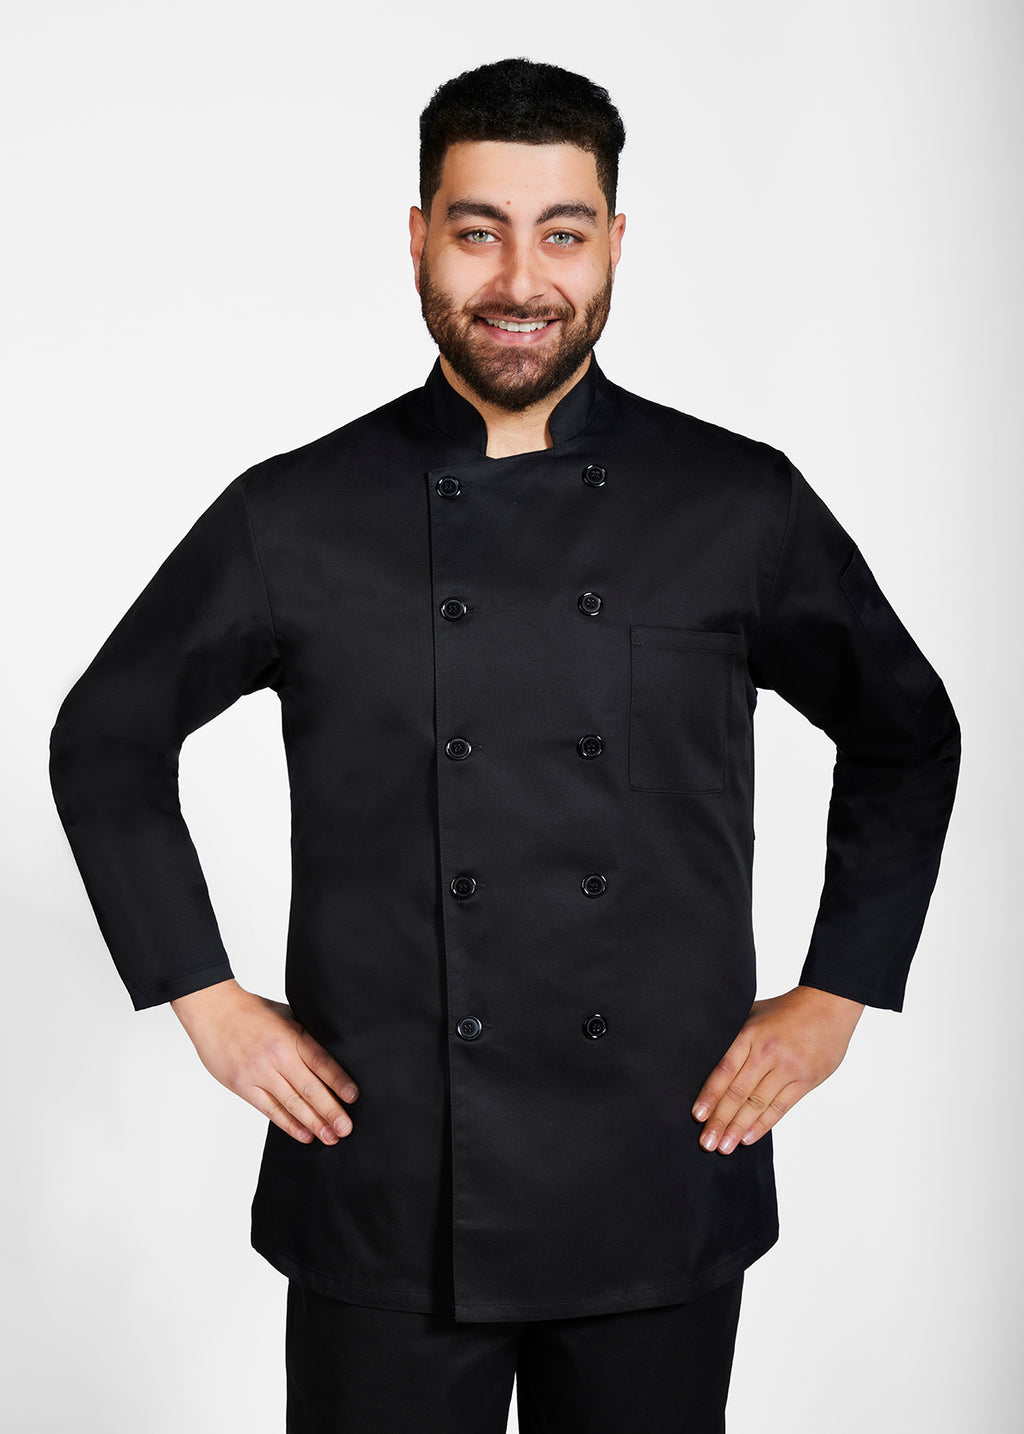 Product - Unisex Long Sleeve Chef Coat by MOBB